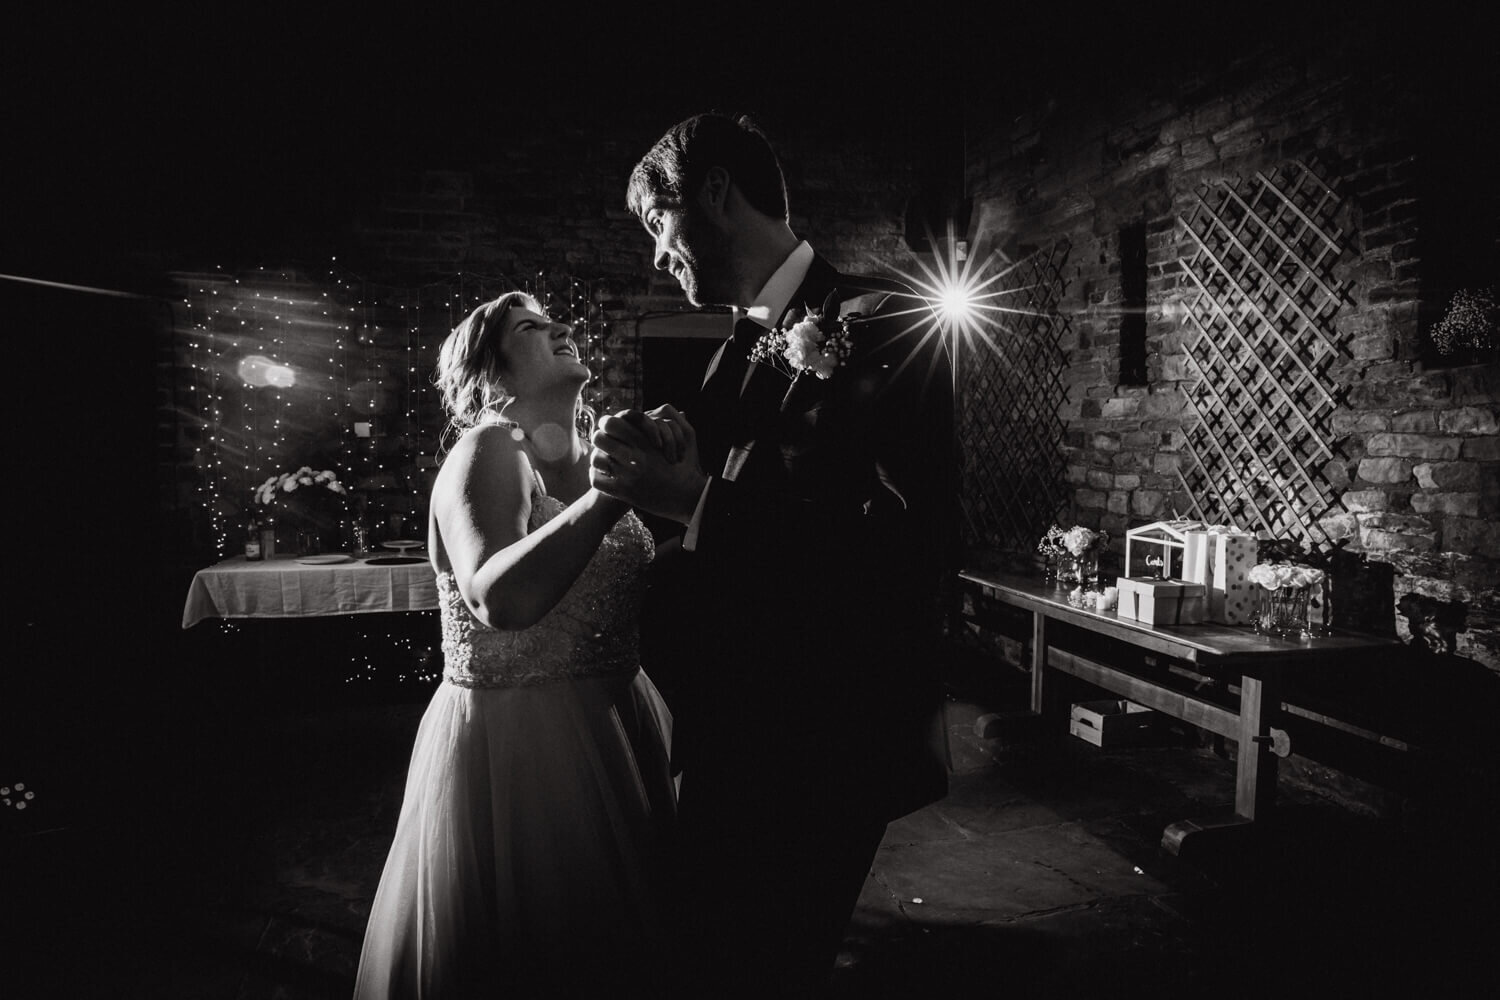 starburst flash photography lights up bride and groom during first dance